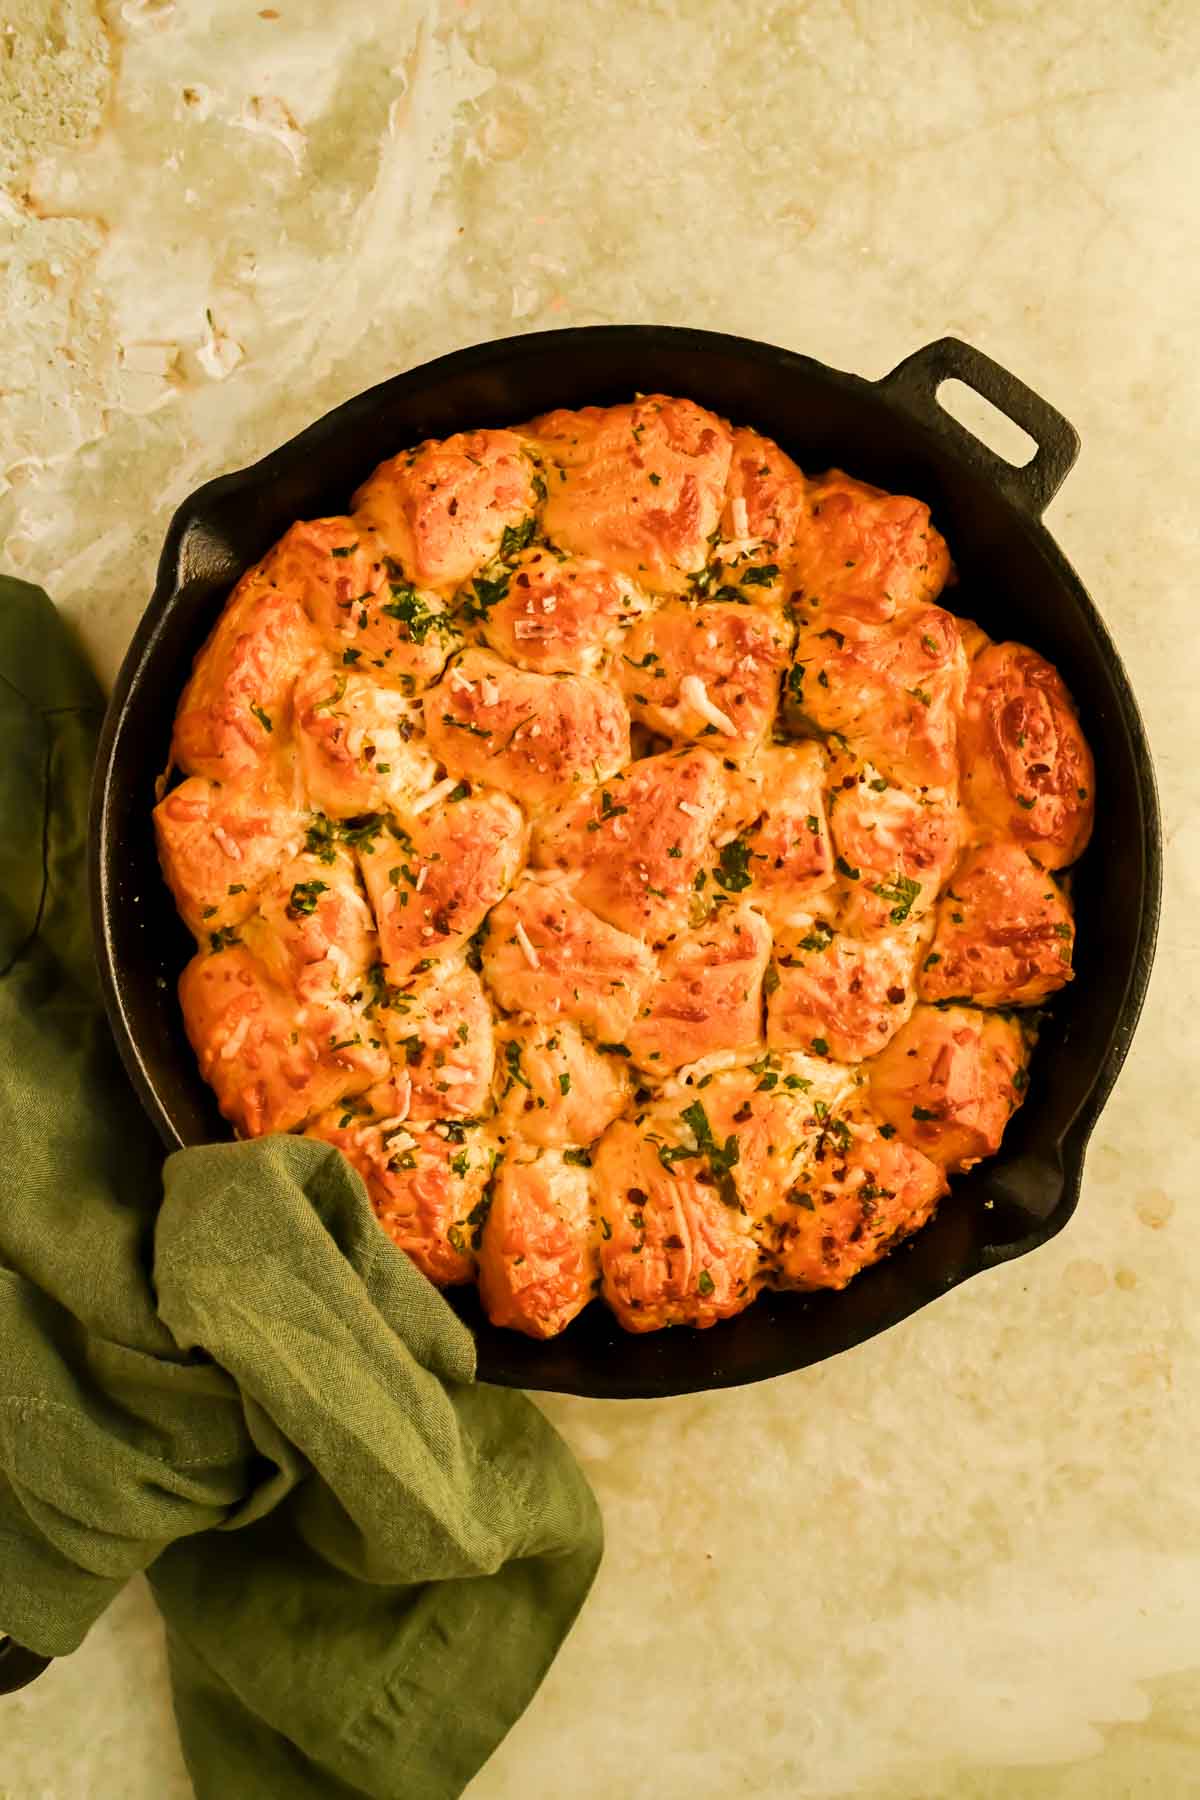 cheesy monkey bread garnished with fresh herbs in black skillet.